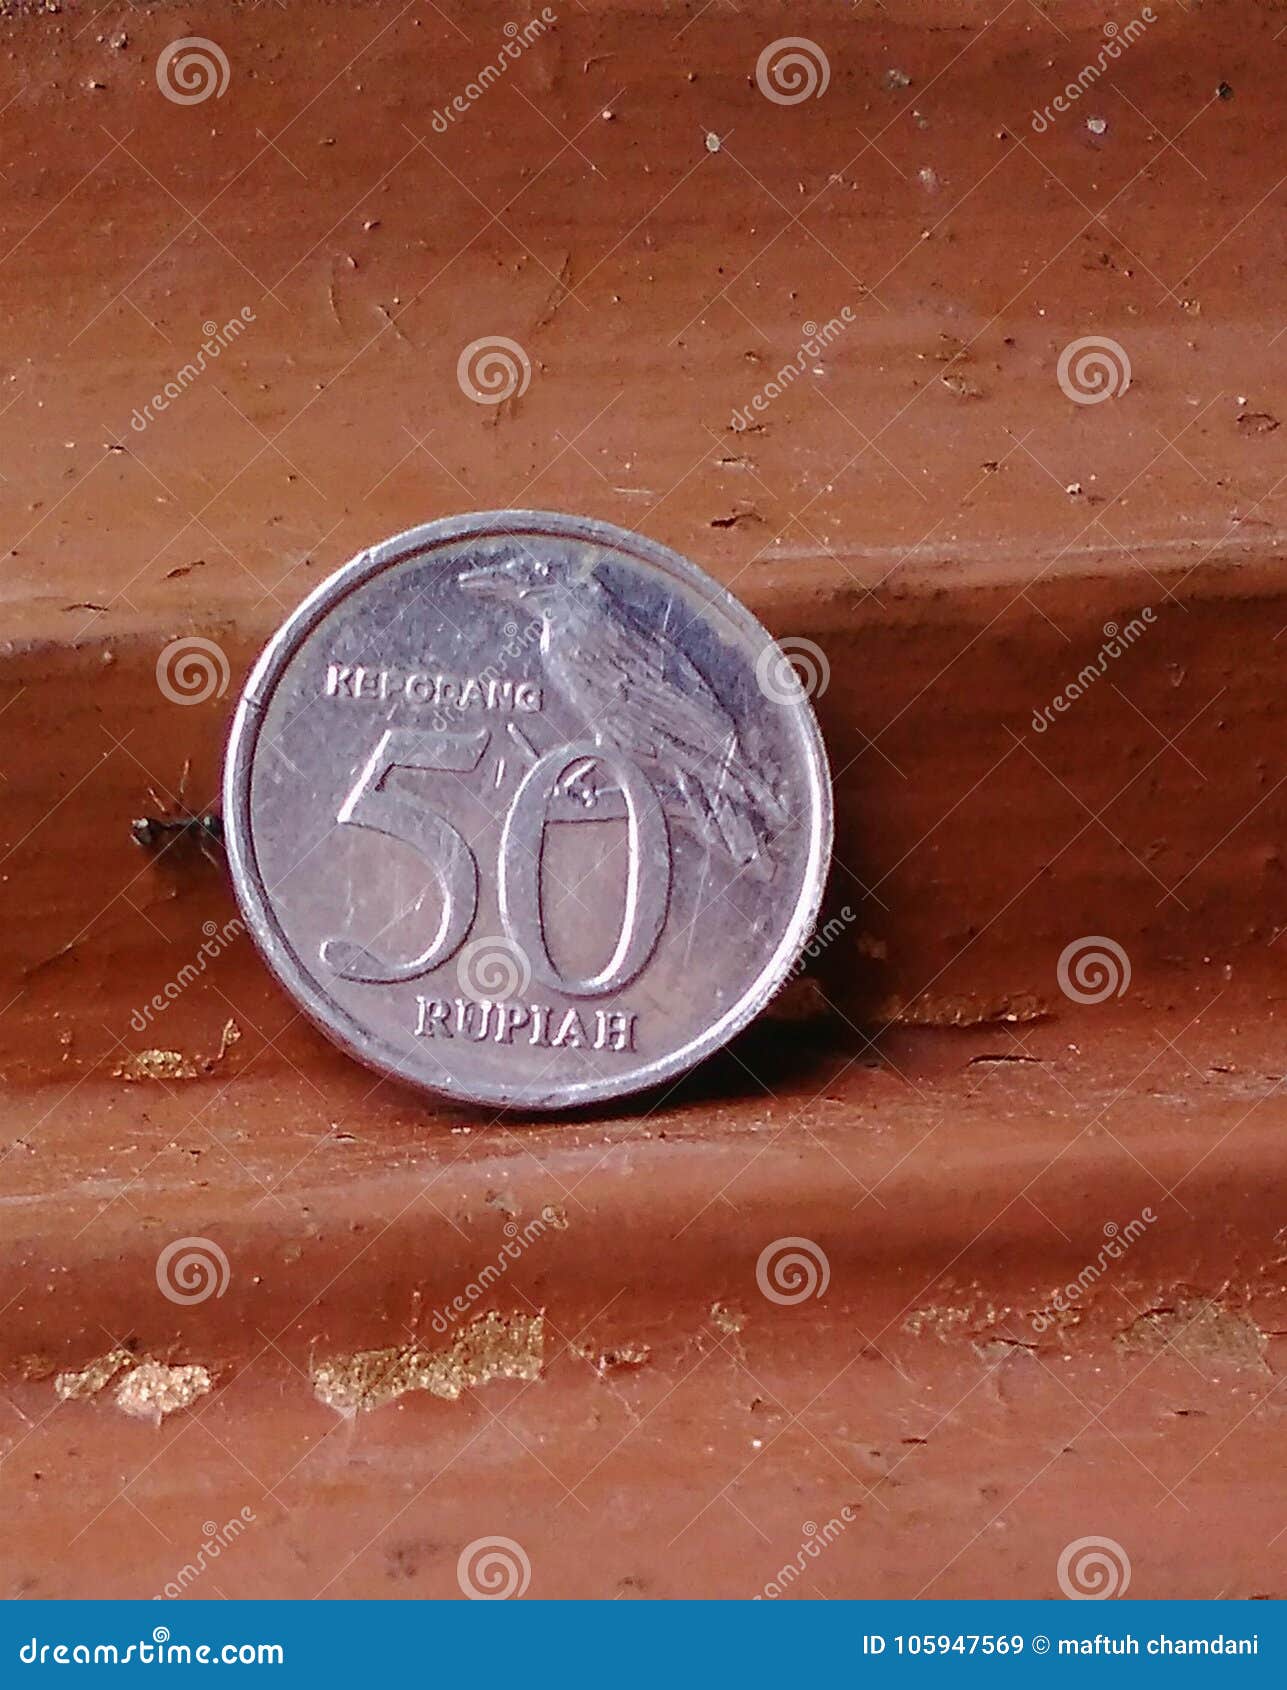 Ant sweet coin stock image. Image of filt, indonesian ...